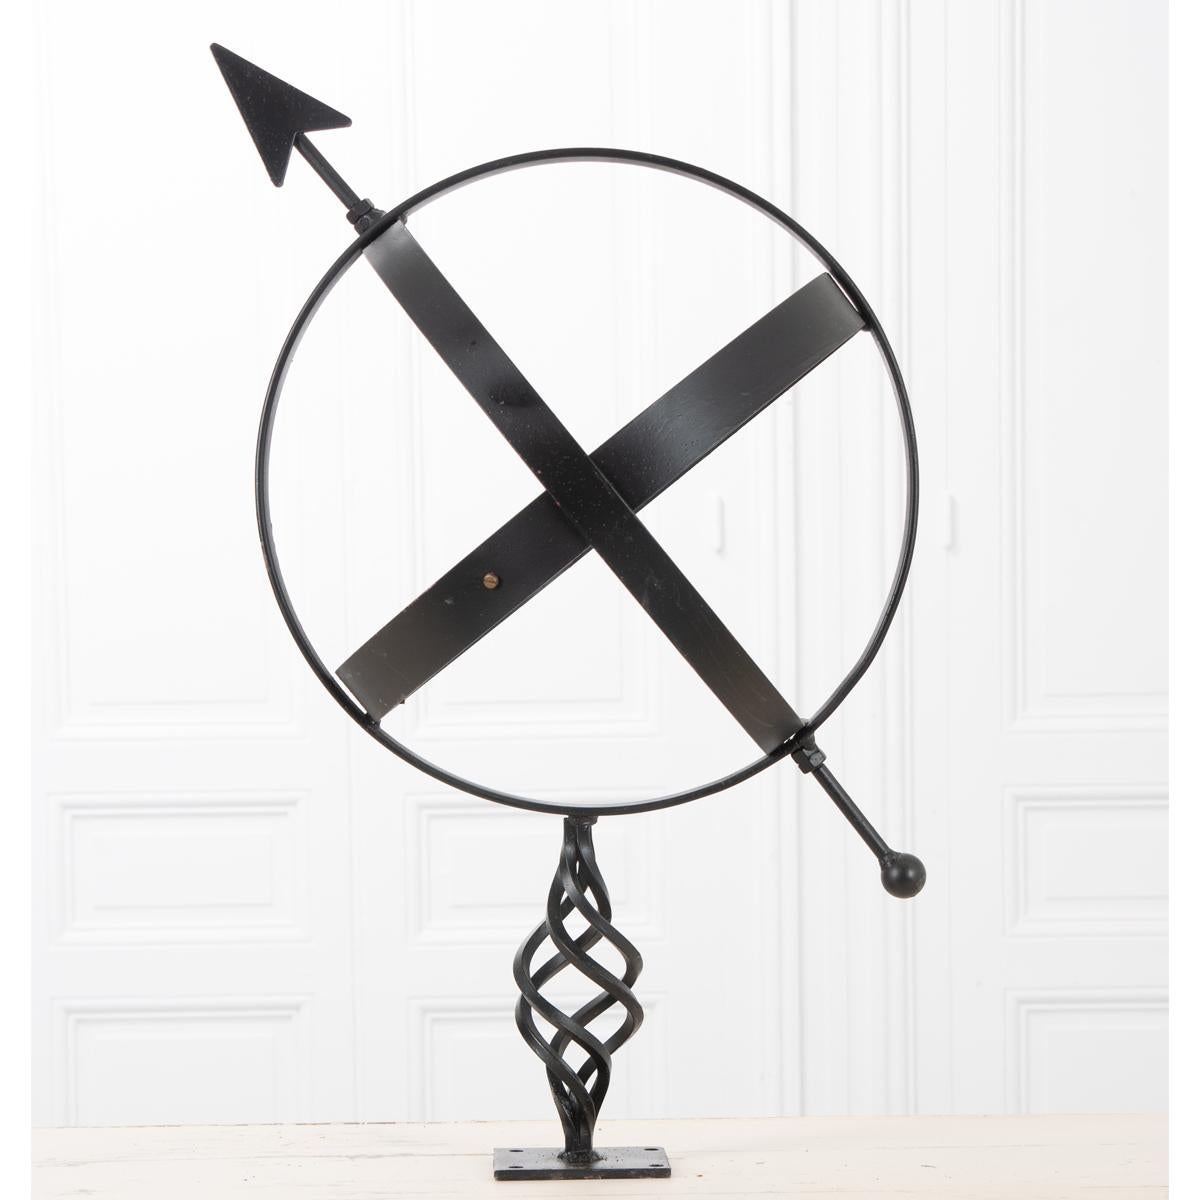 A great vintage iron armillary. The armillary has a black painted finish with an accent of brass. This piece is intended for ornamental use.